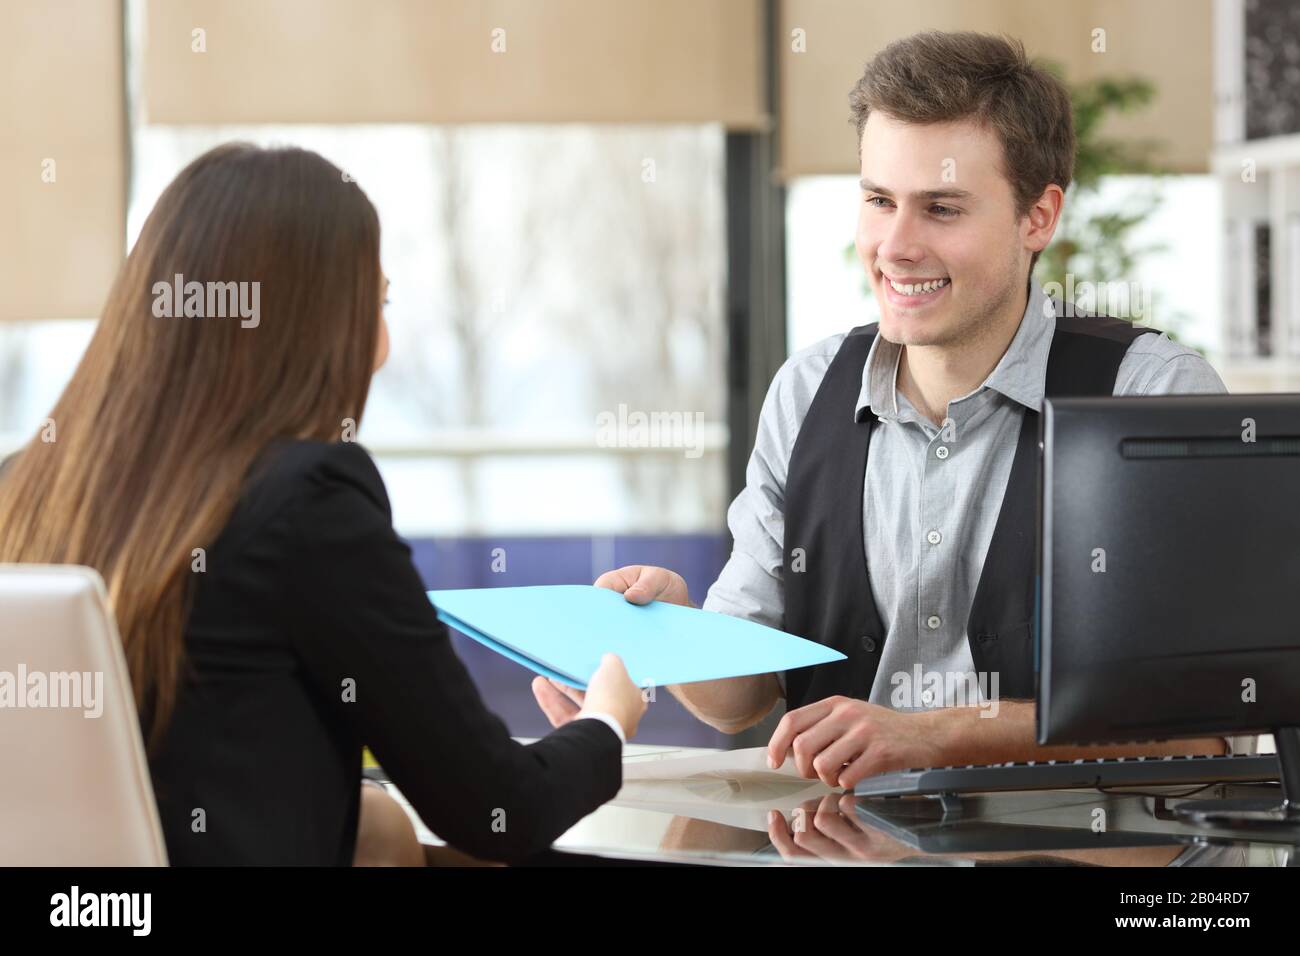 Businessman giving documents to a client sitting at office during an interview Stock Photo